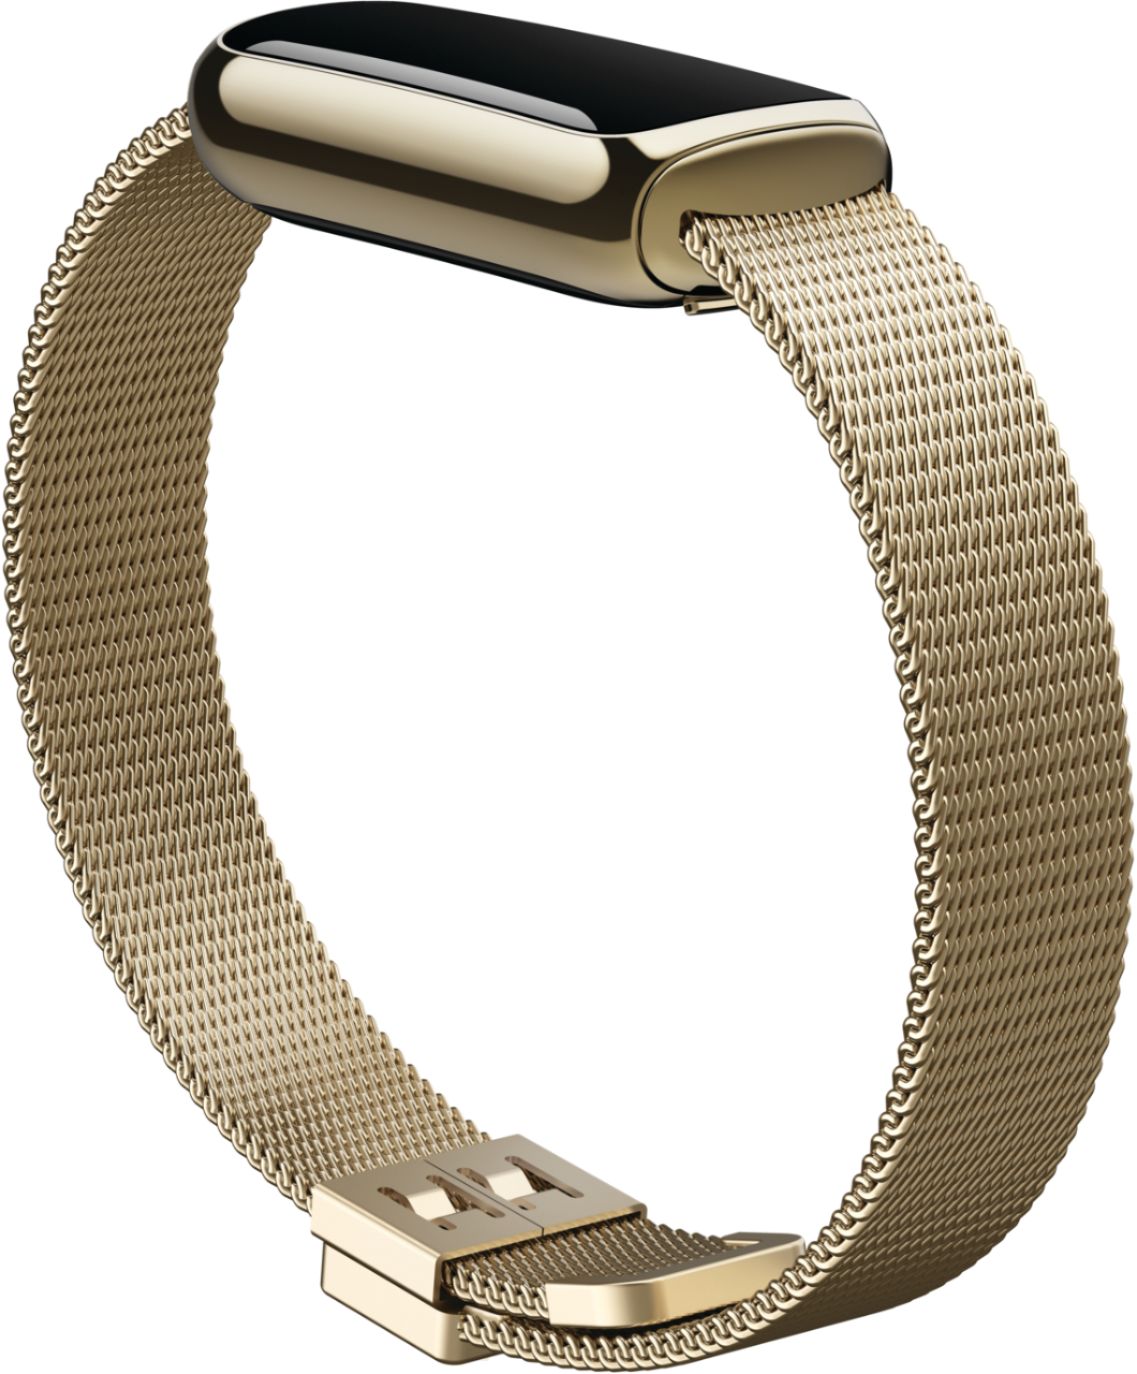 Angle View: Fitbit - Luxe Stainless Steel Mesh Accessory Band, One Size - Soft Gold